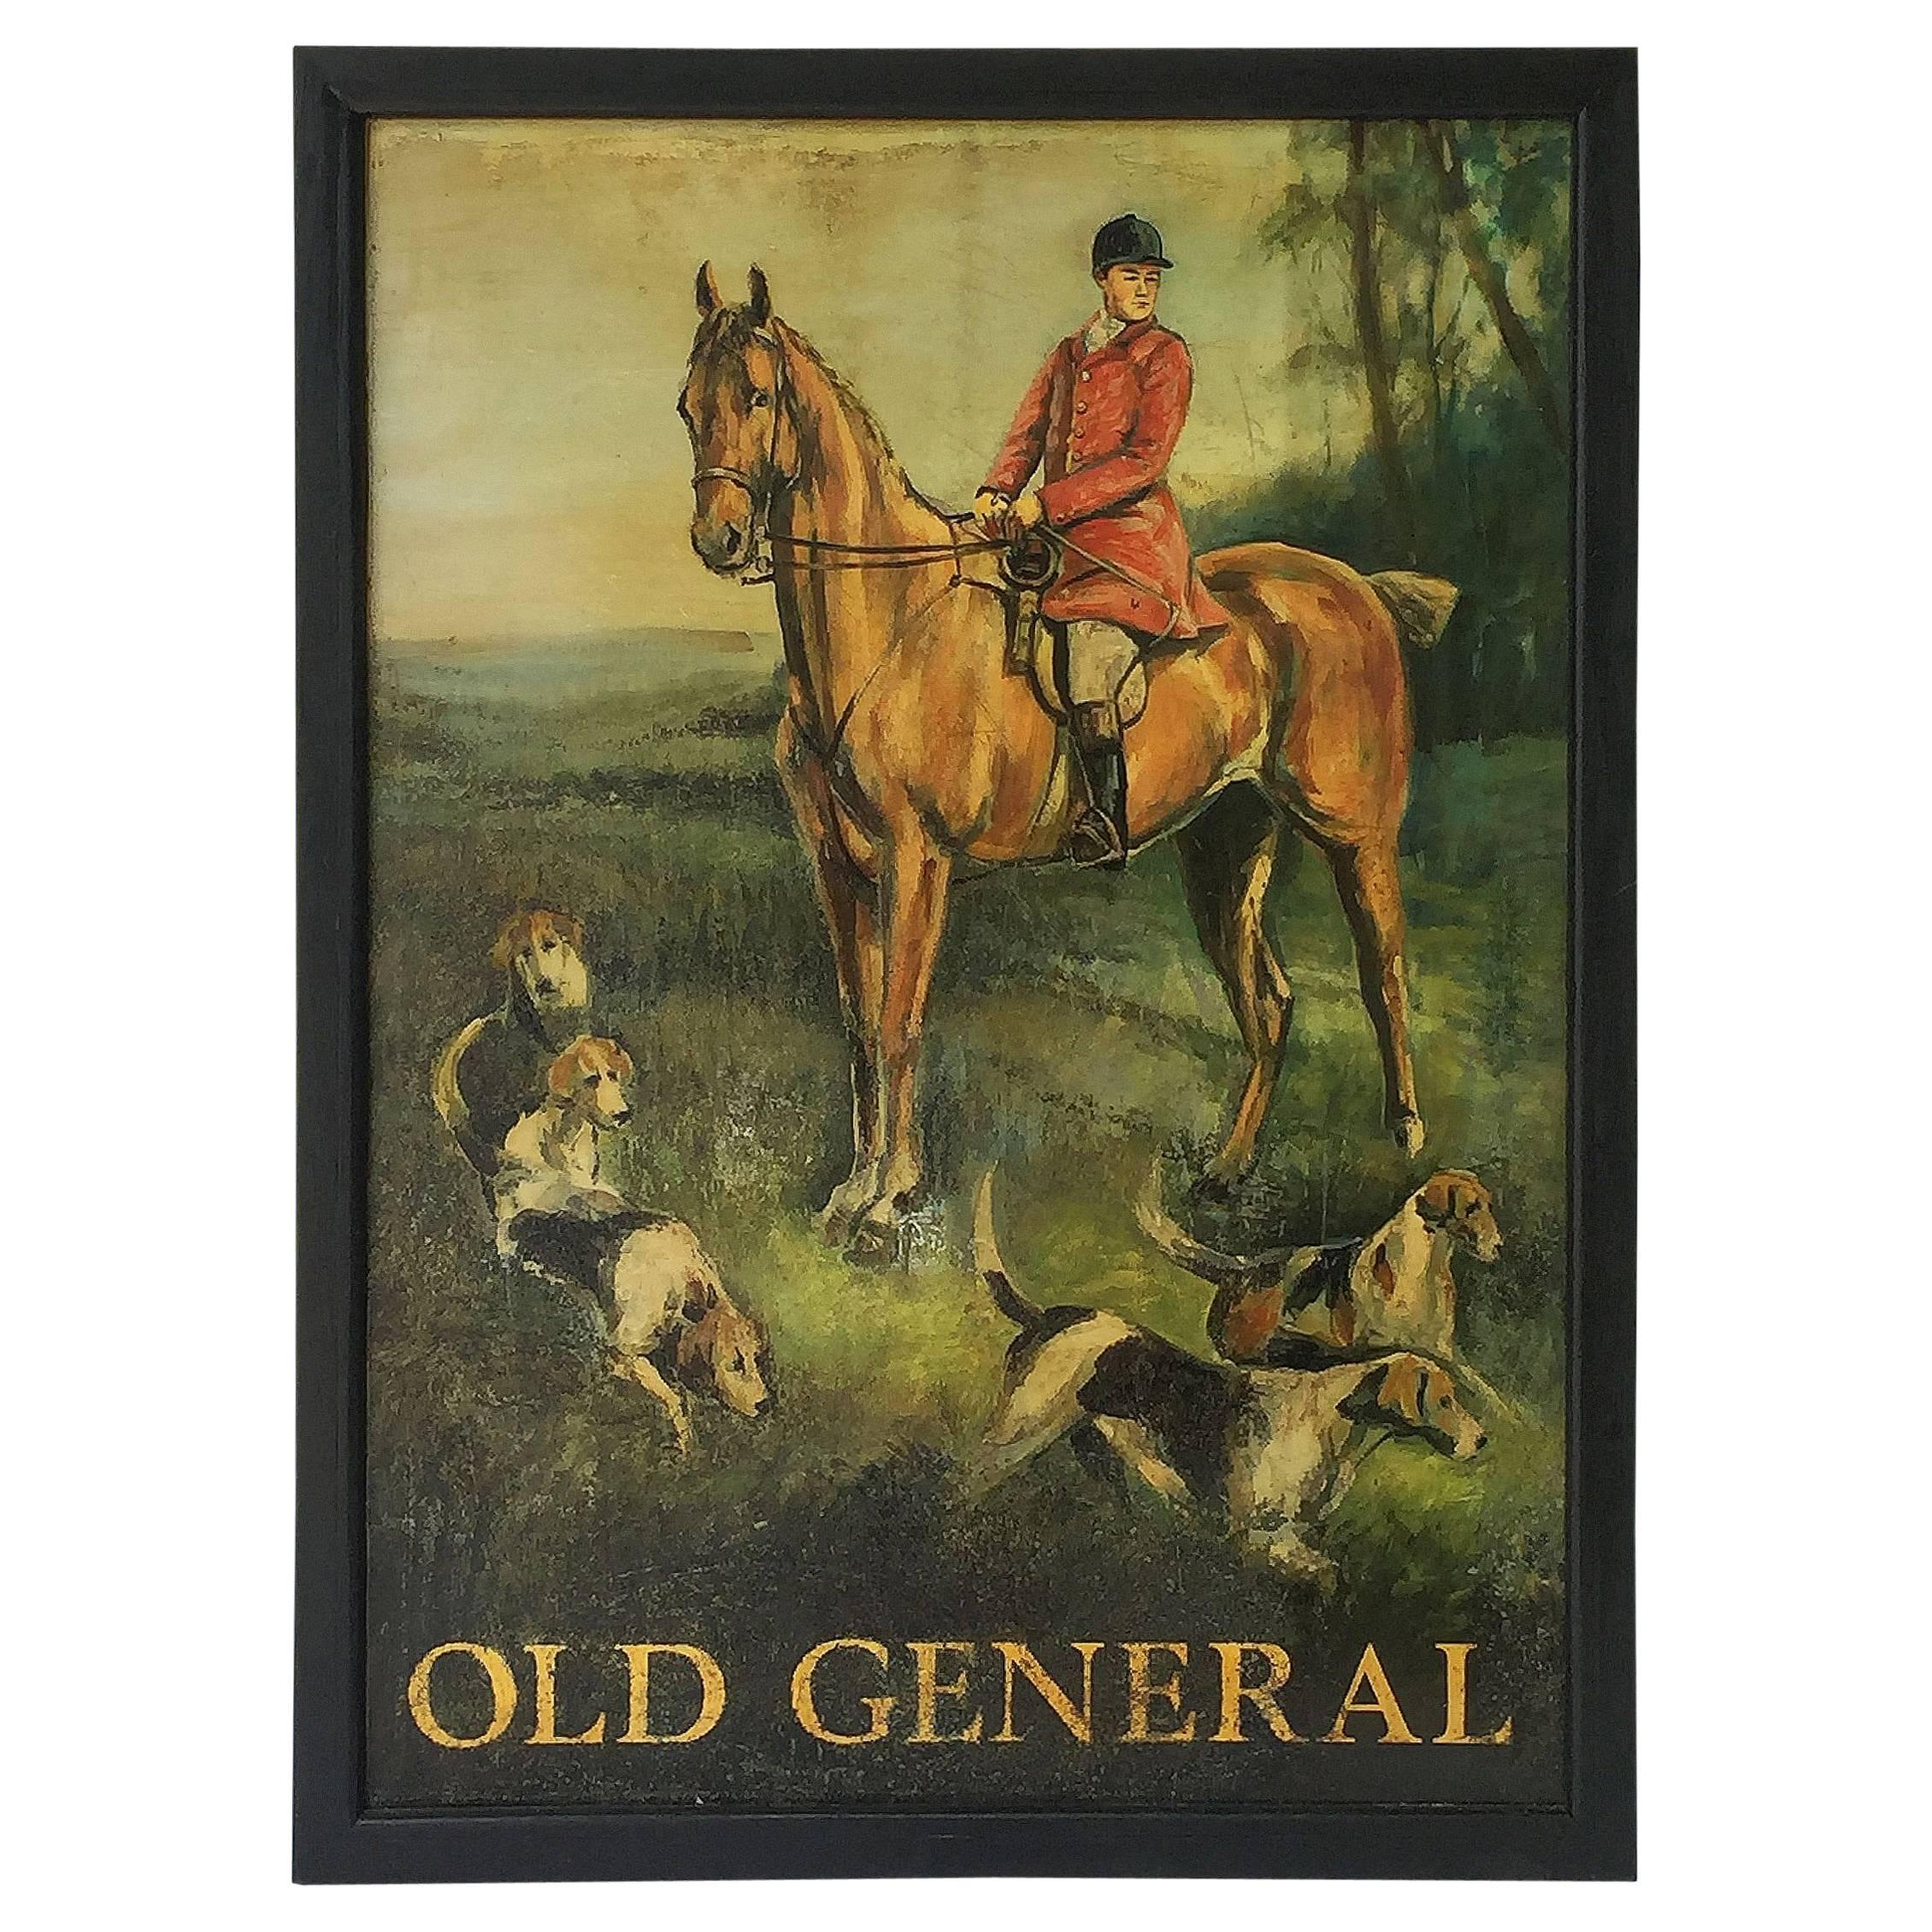 English Pub Sign, "Old General"